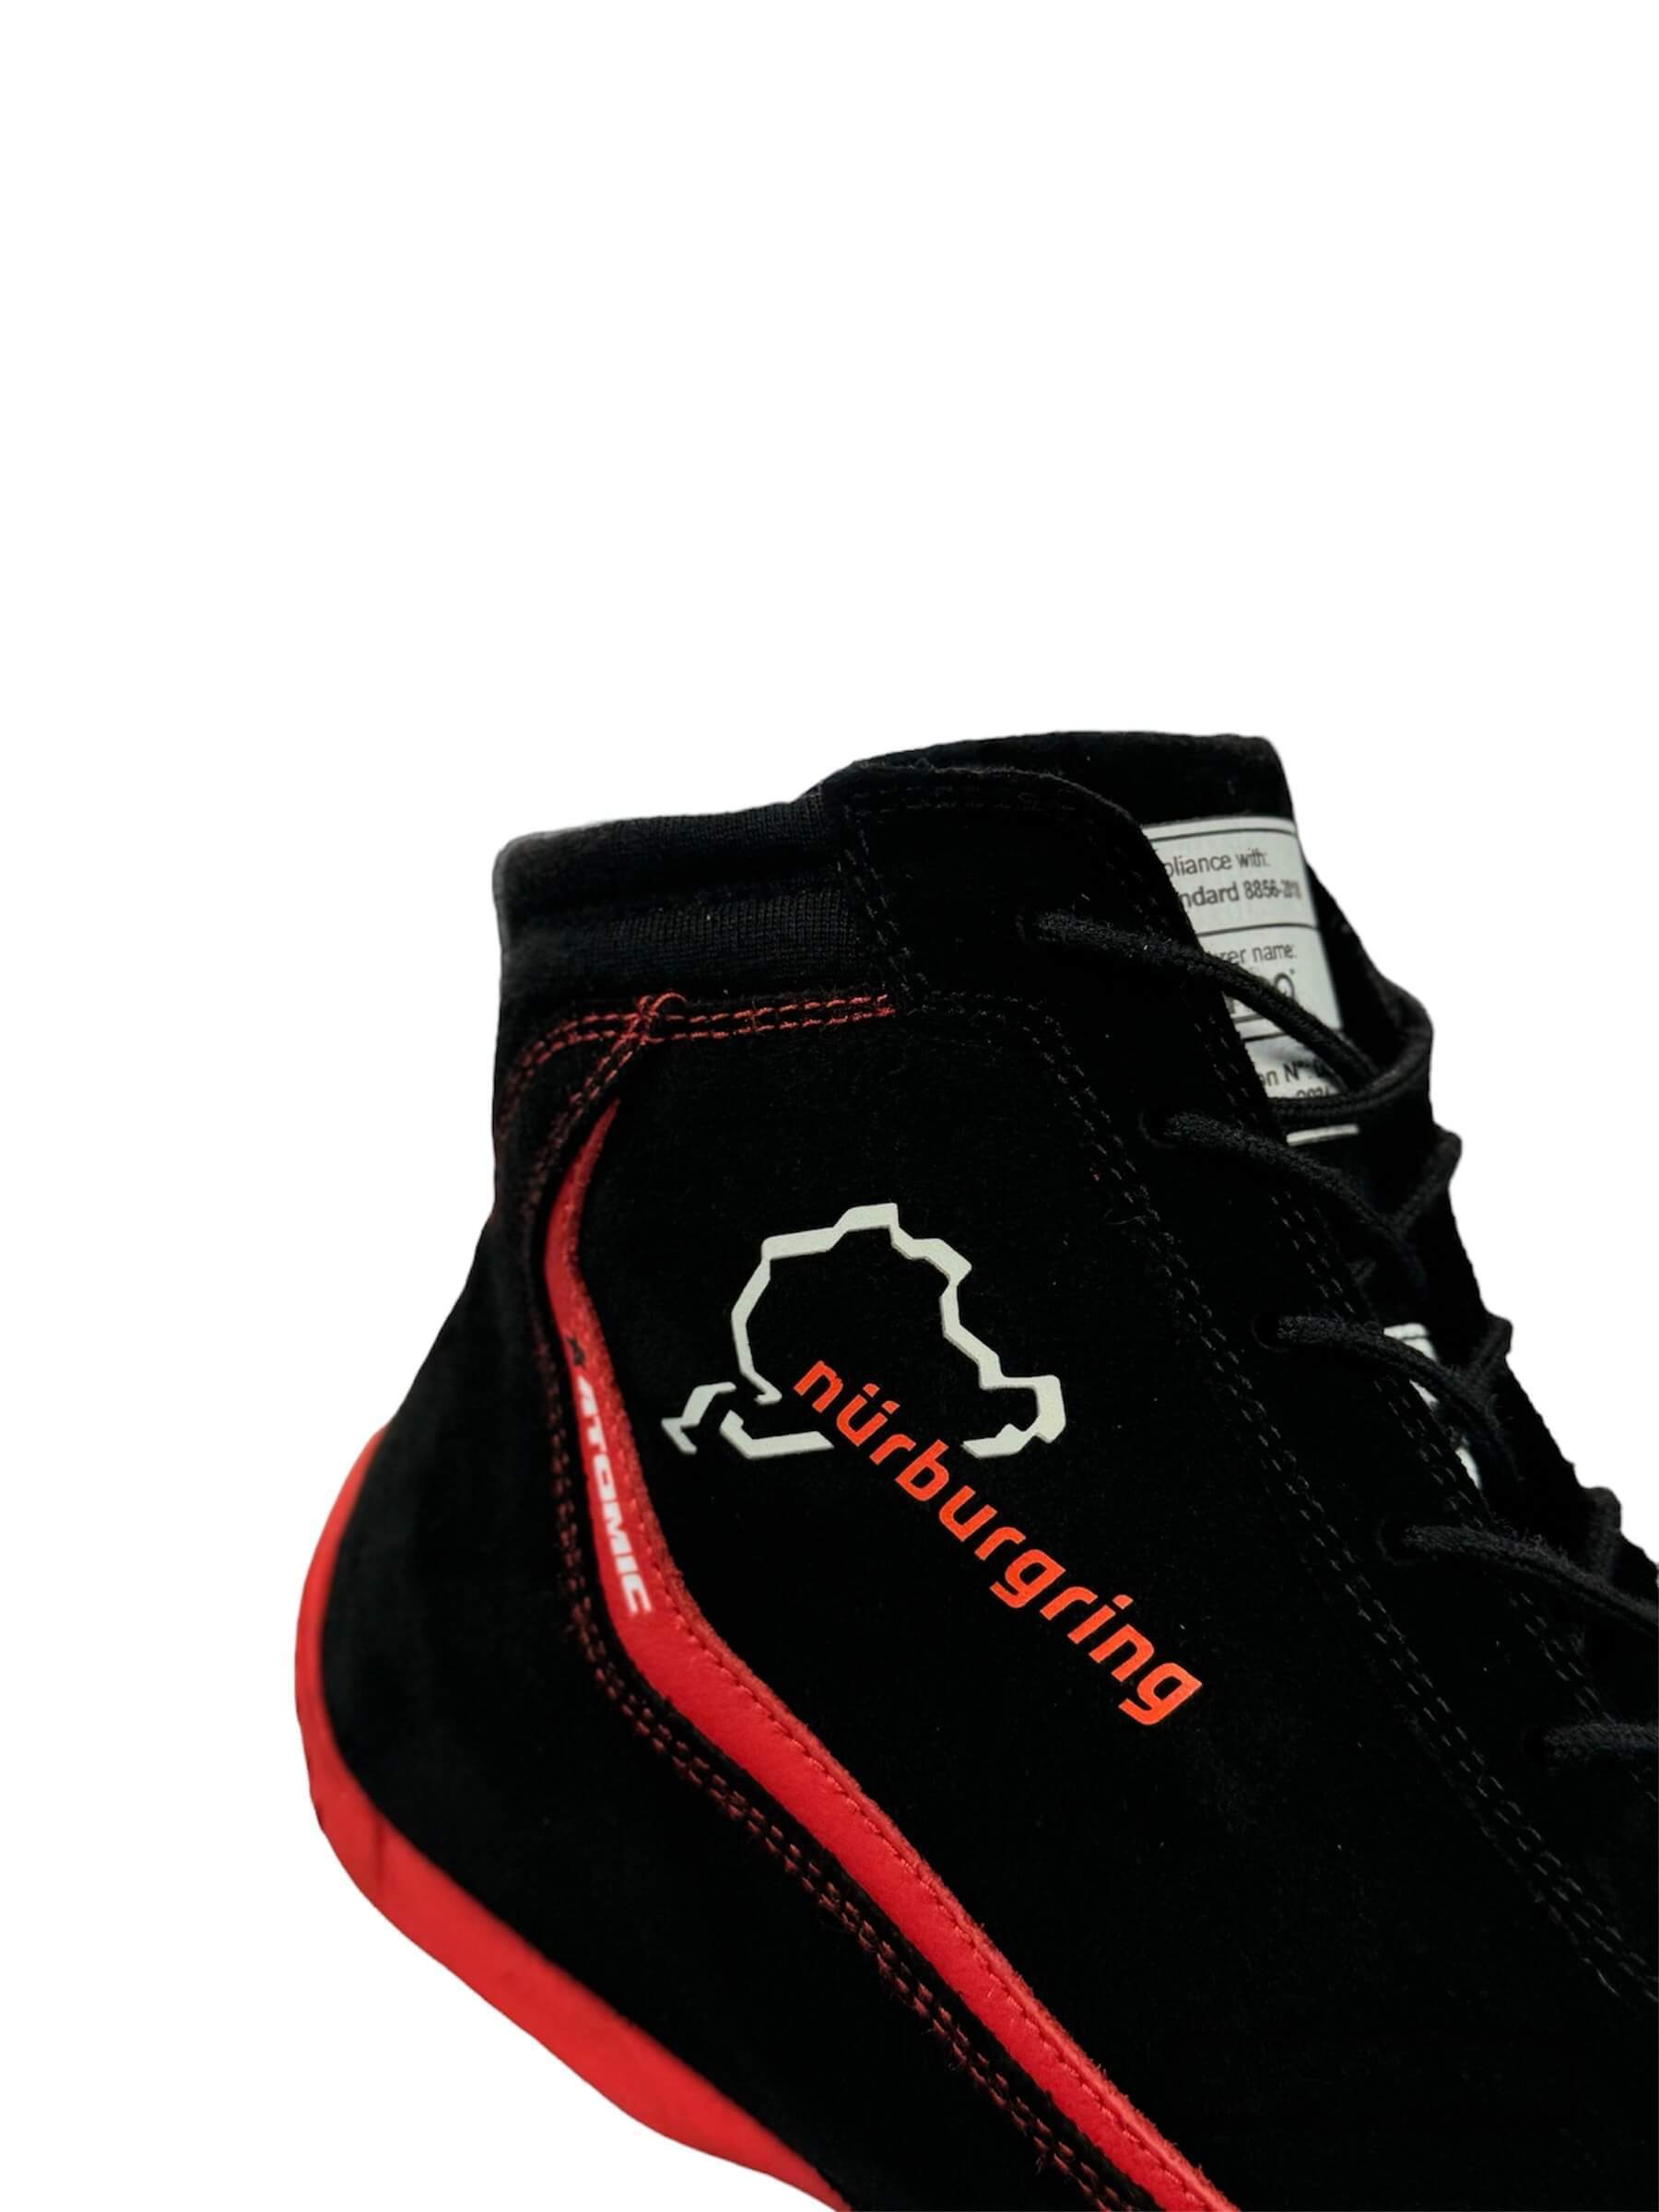 SPARCO 001295SP_NBR43 Shoes Slalom Nurburgring Edition black/red Size 43 Photo-4 